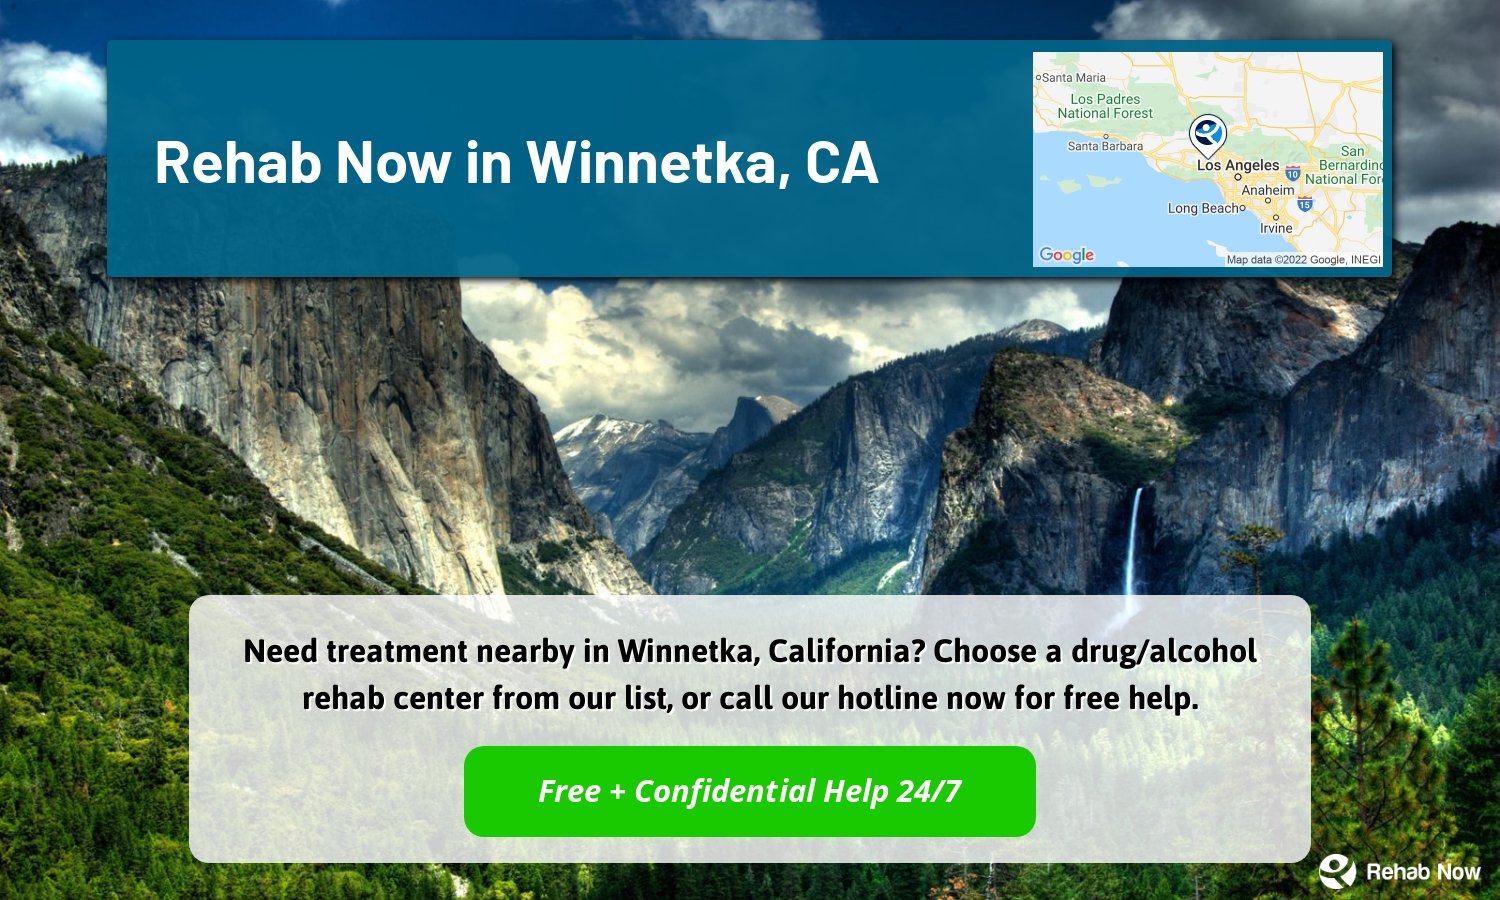 Need treatment nearby in Winnetka, California? Choose a drug/alcohol rehab center from our list, or call our hotline now for free help.